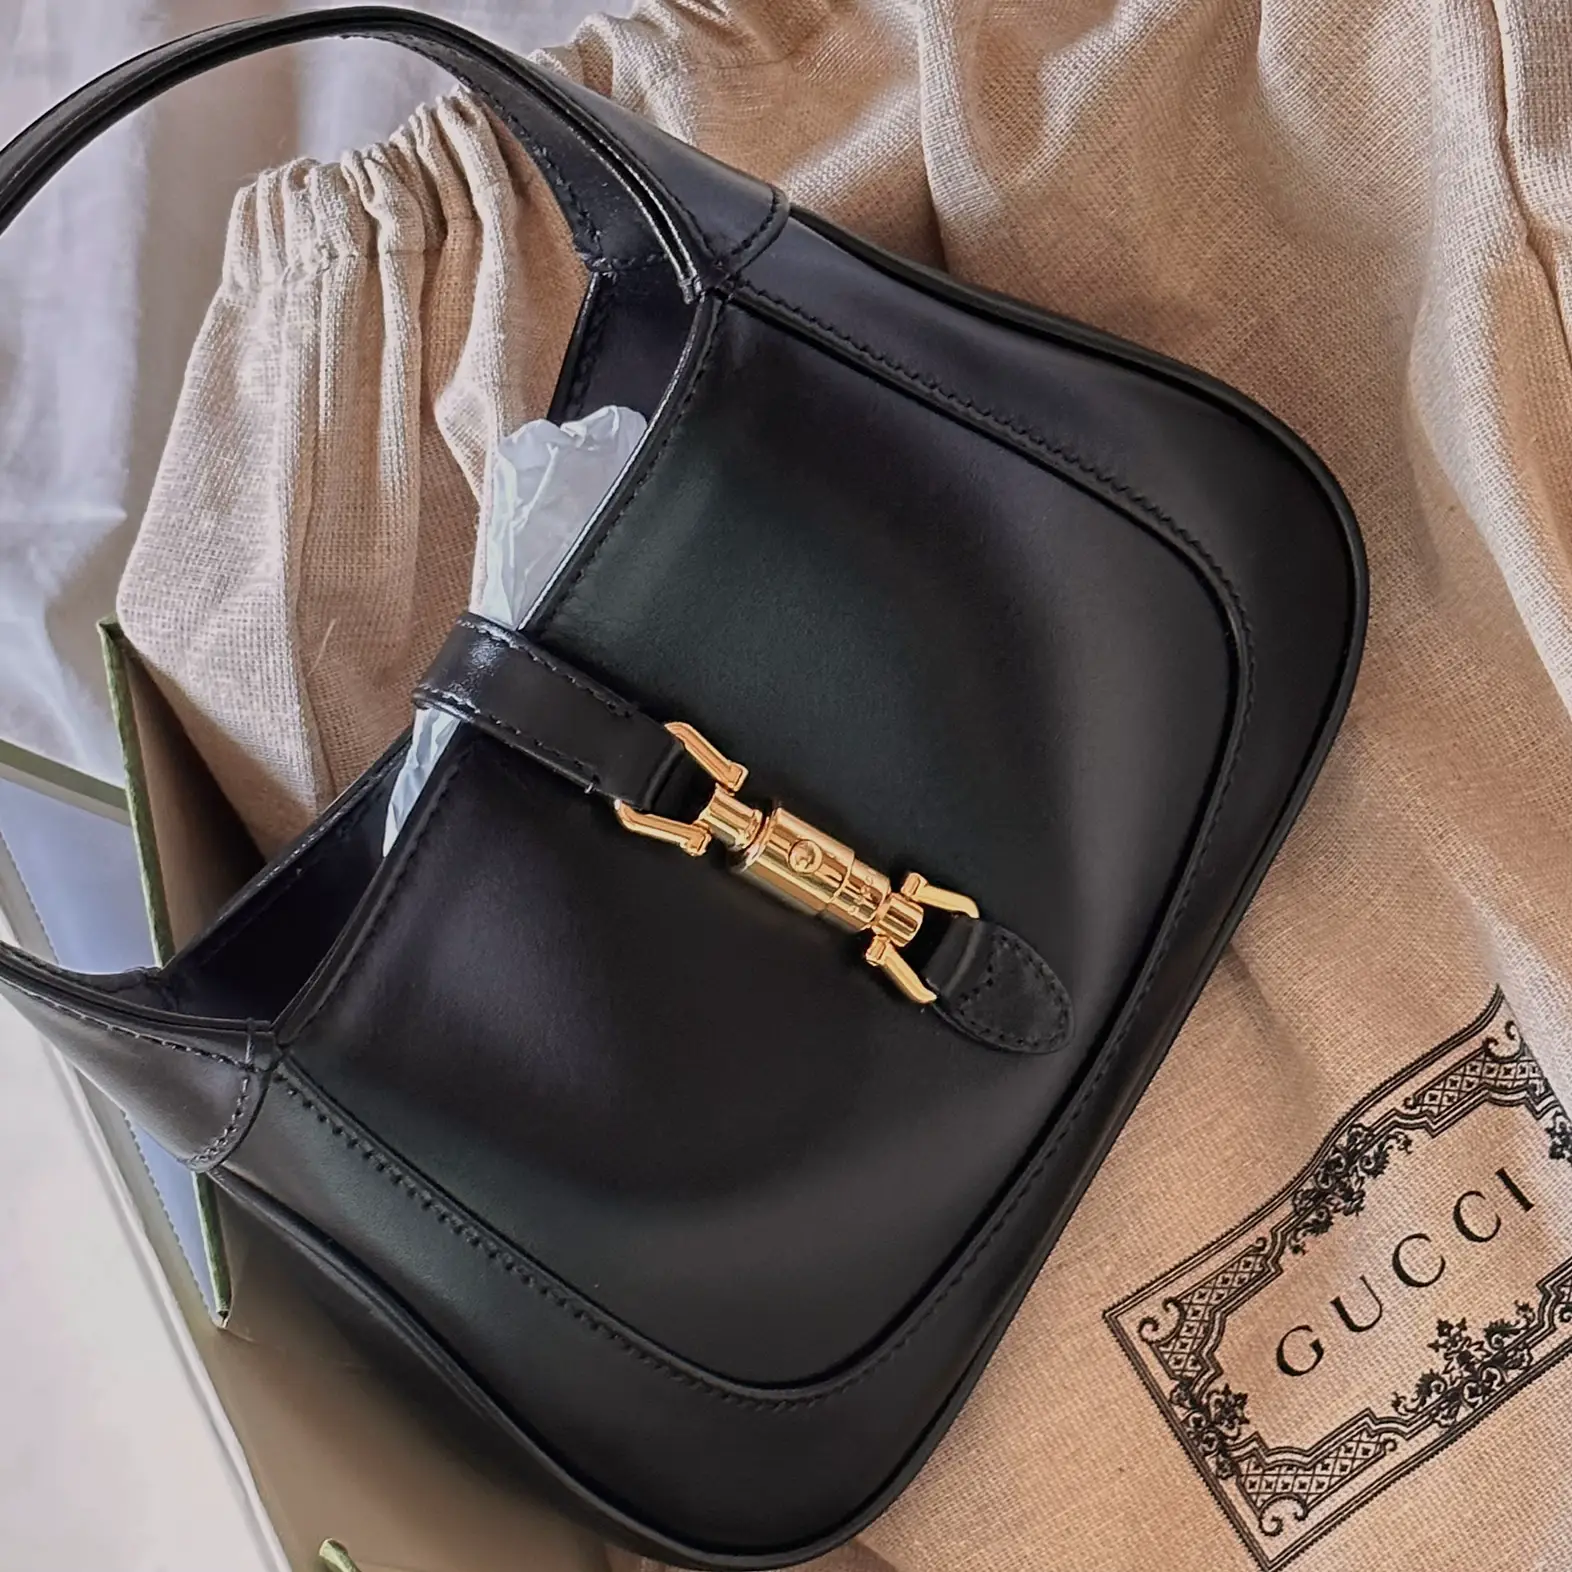 Gucci's Jackie 1961 Bag Is the Moment